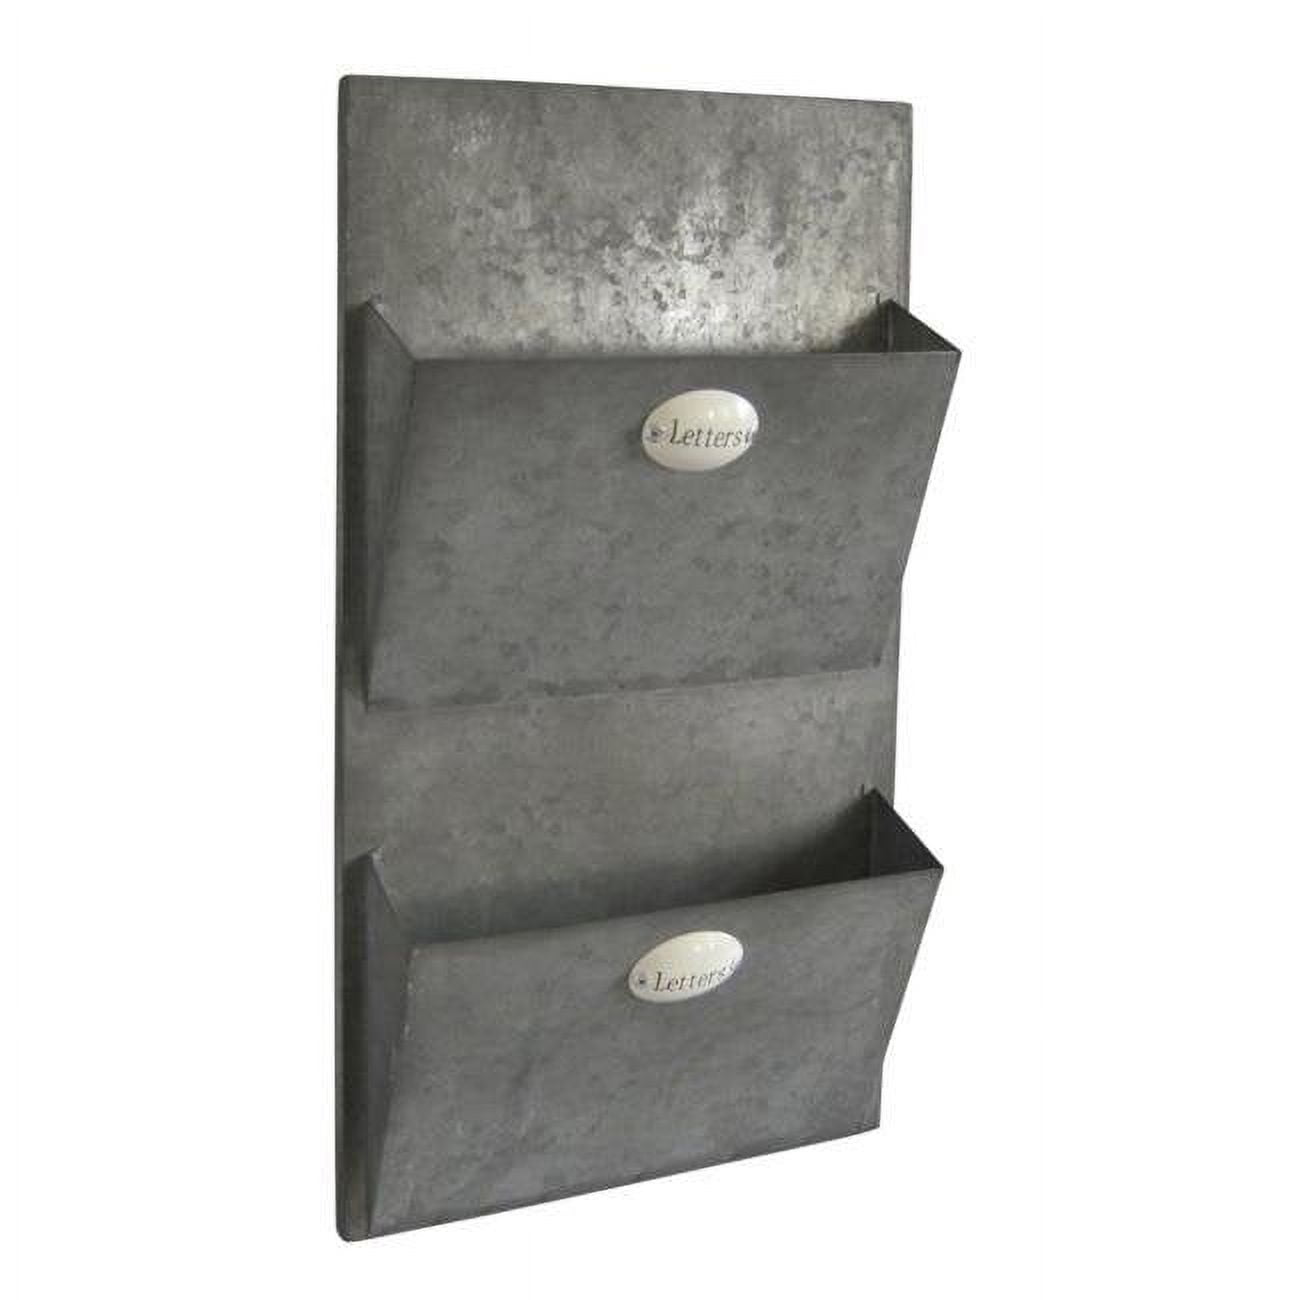 Cheung Fp-3384 Metal Wall 2 Letter Holder